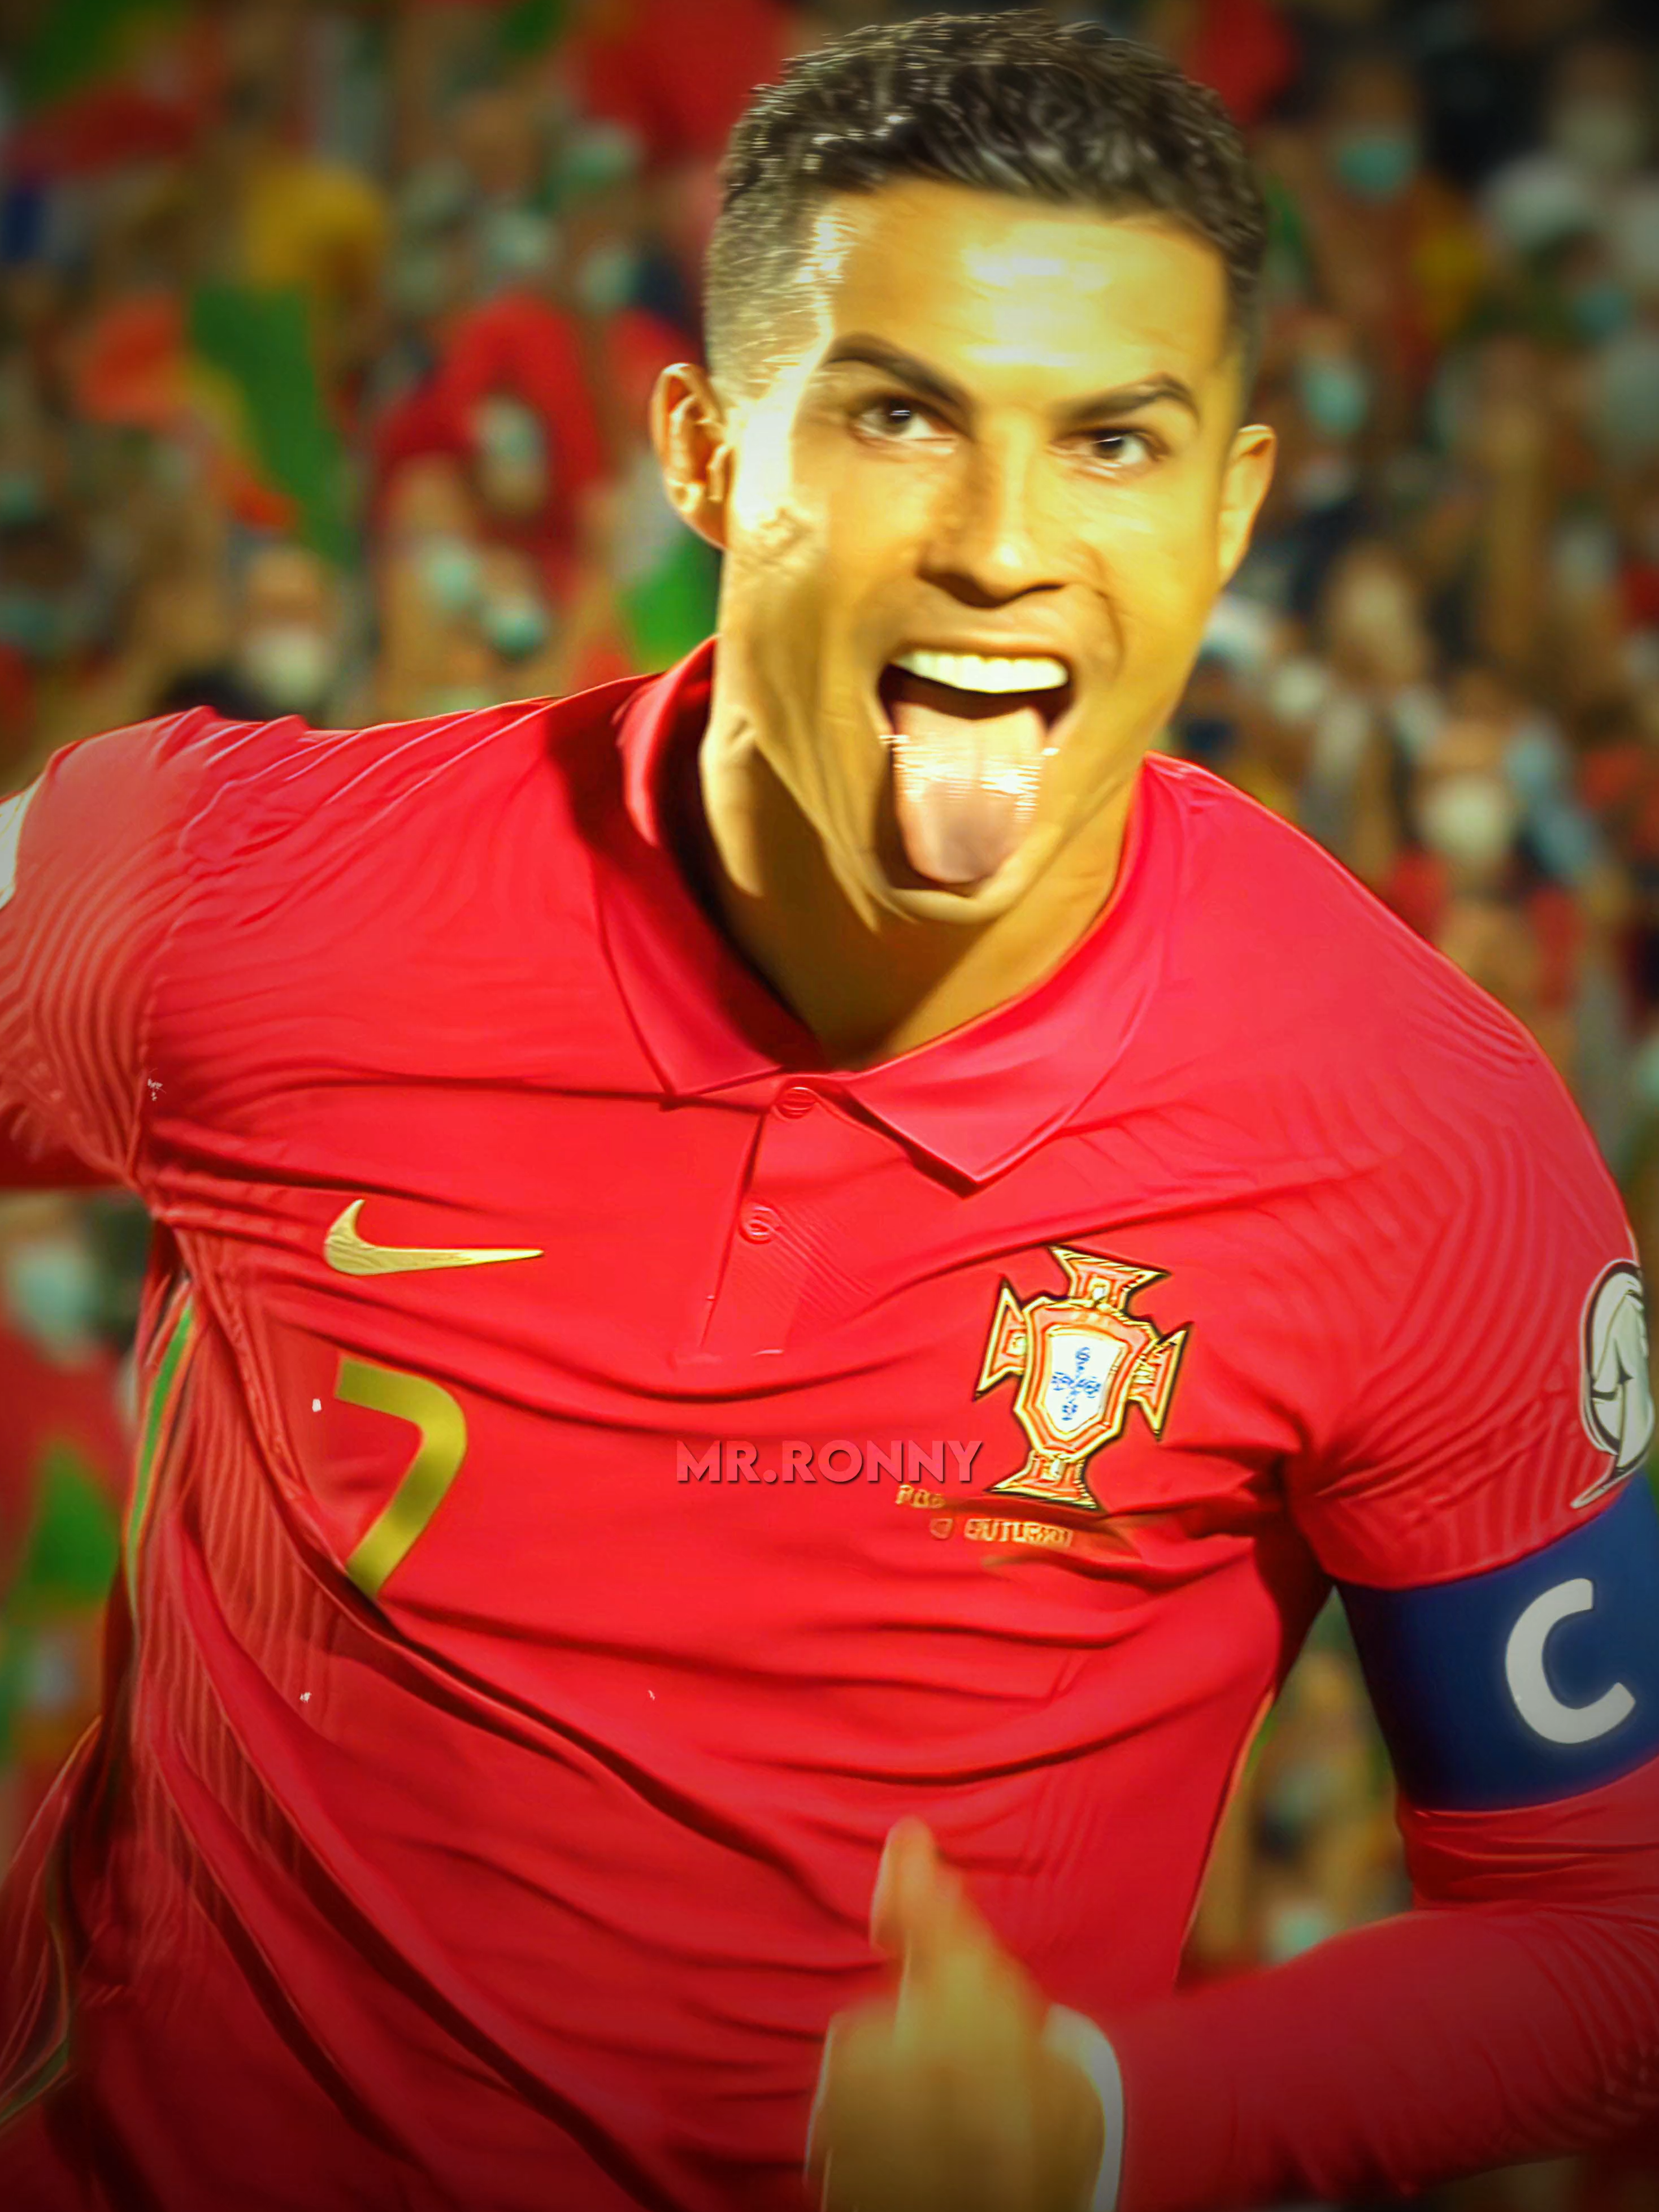 Ronaldos tongue 👅🤣 | Get 4k comps in bio | #ronaldo #foryourpage #fyp #portugal #tongue #aftereffects